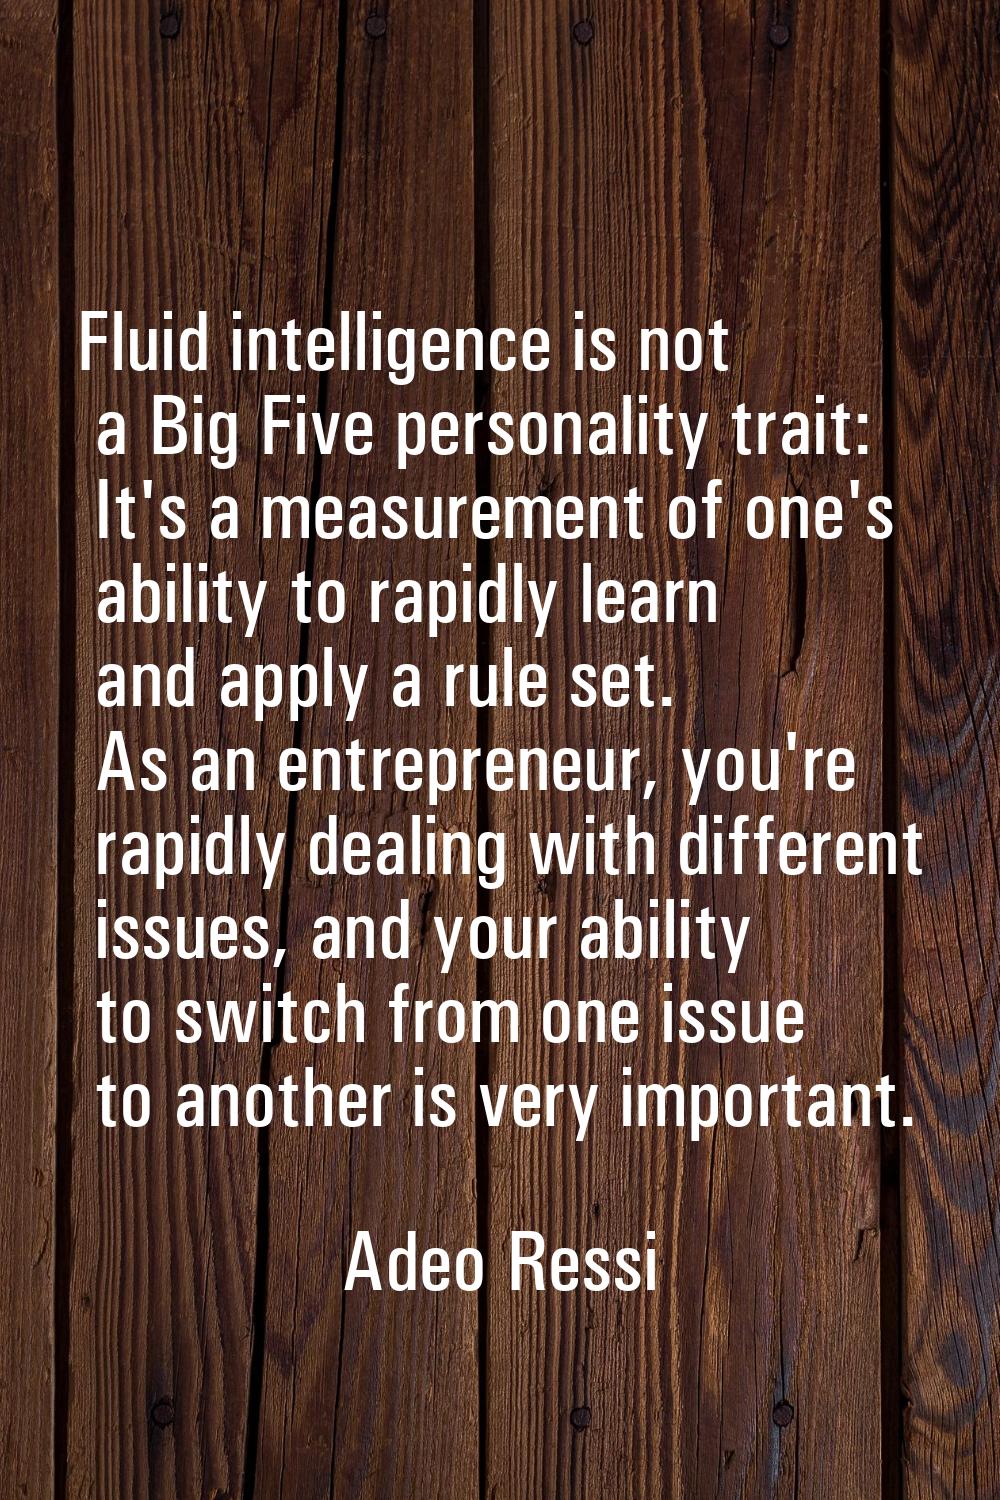 Fluid intelligence is not a Big Five personality trait: It's a measurement of one's ability to rapi